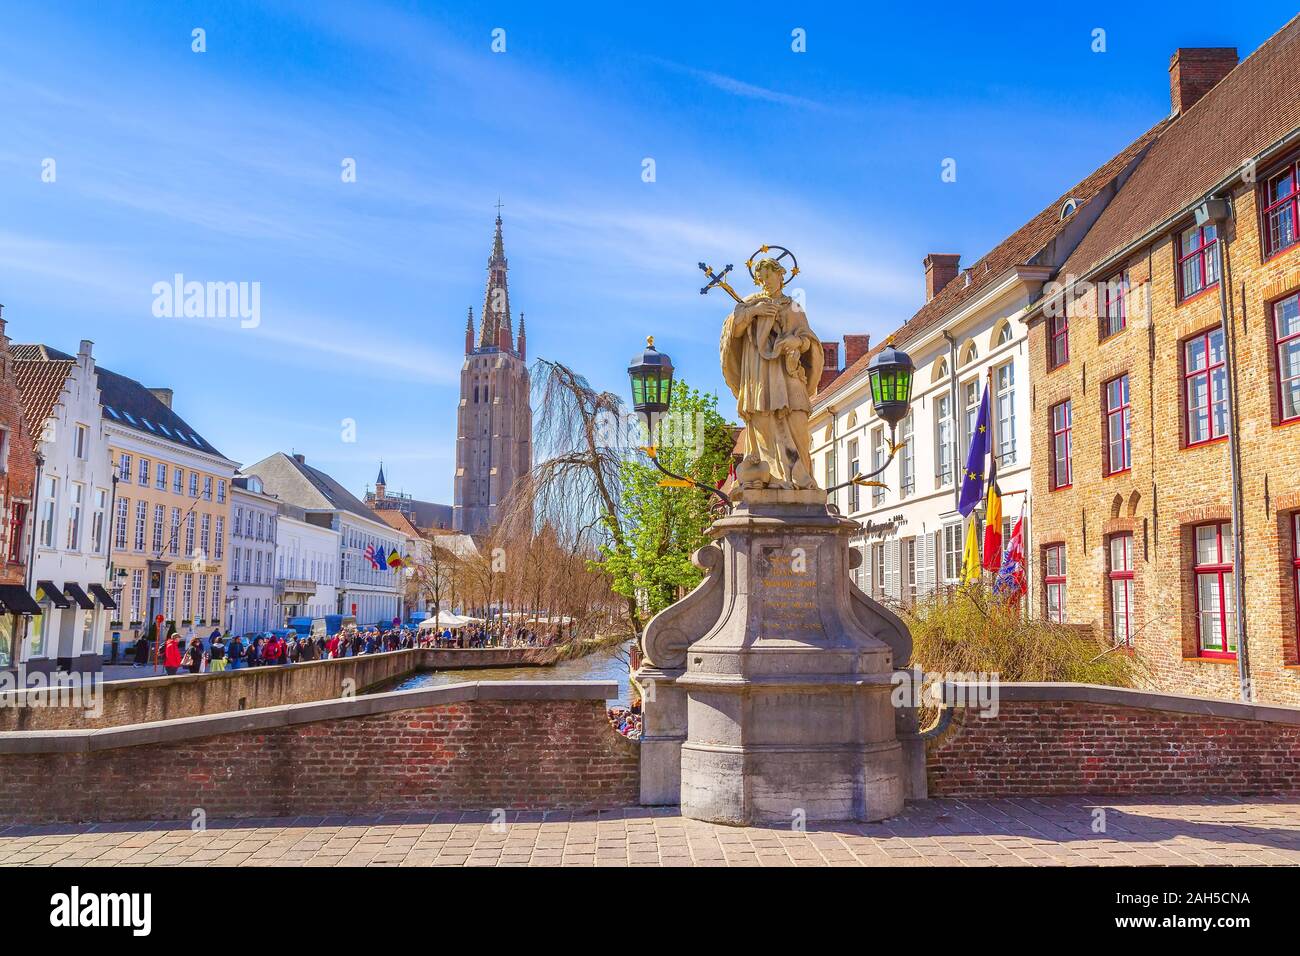 Bruges, Belgium - April 10, 2016: Street and canal view with houses, statue of Johannes Nepomucenus, church tower and people in Brugge Stock Photo